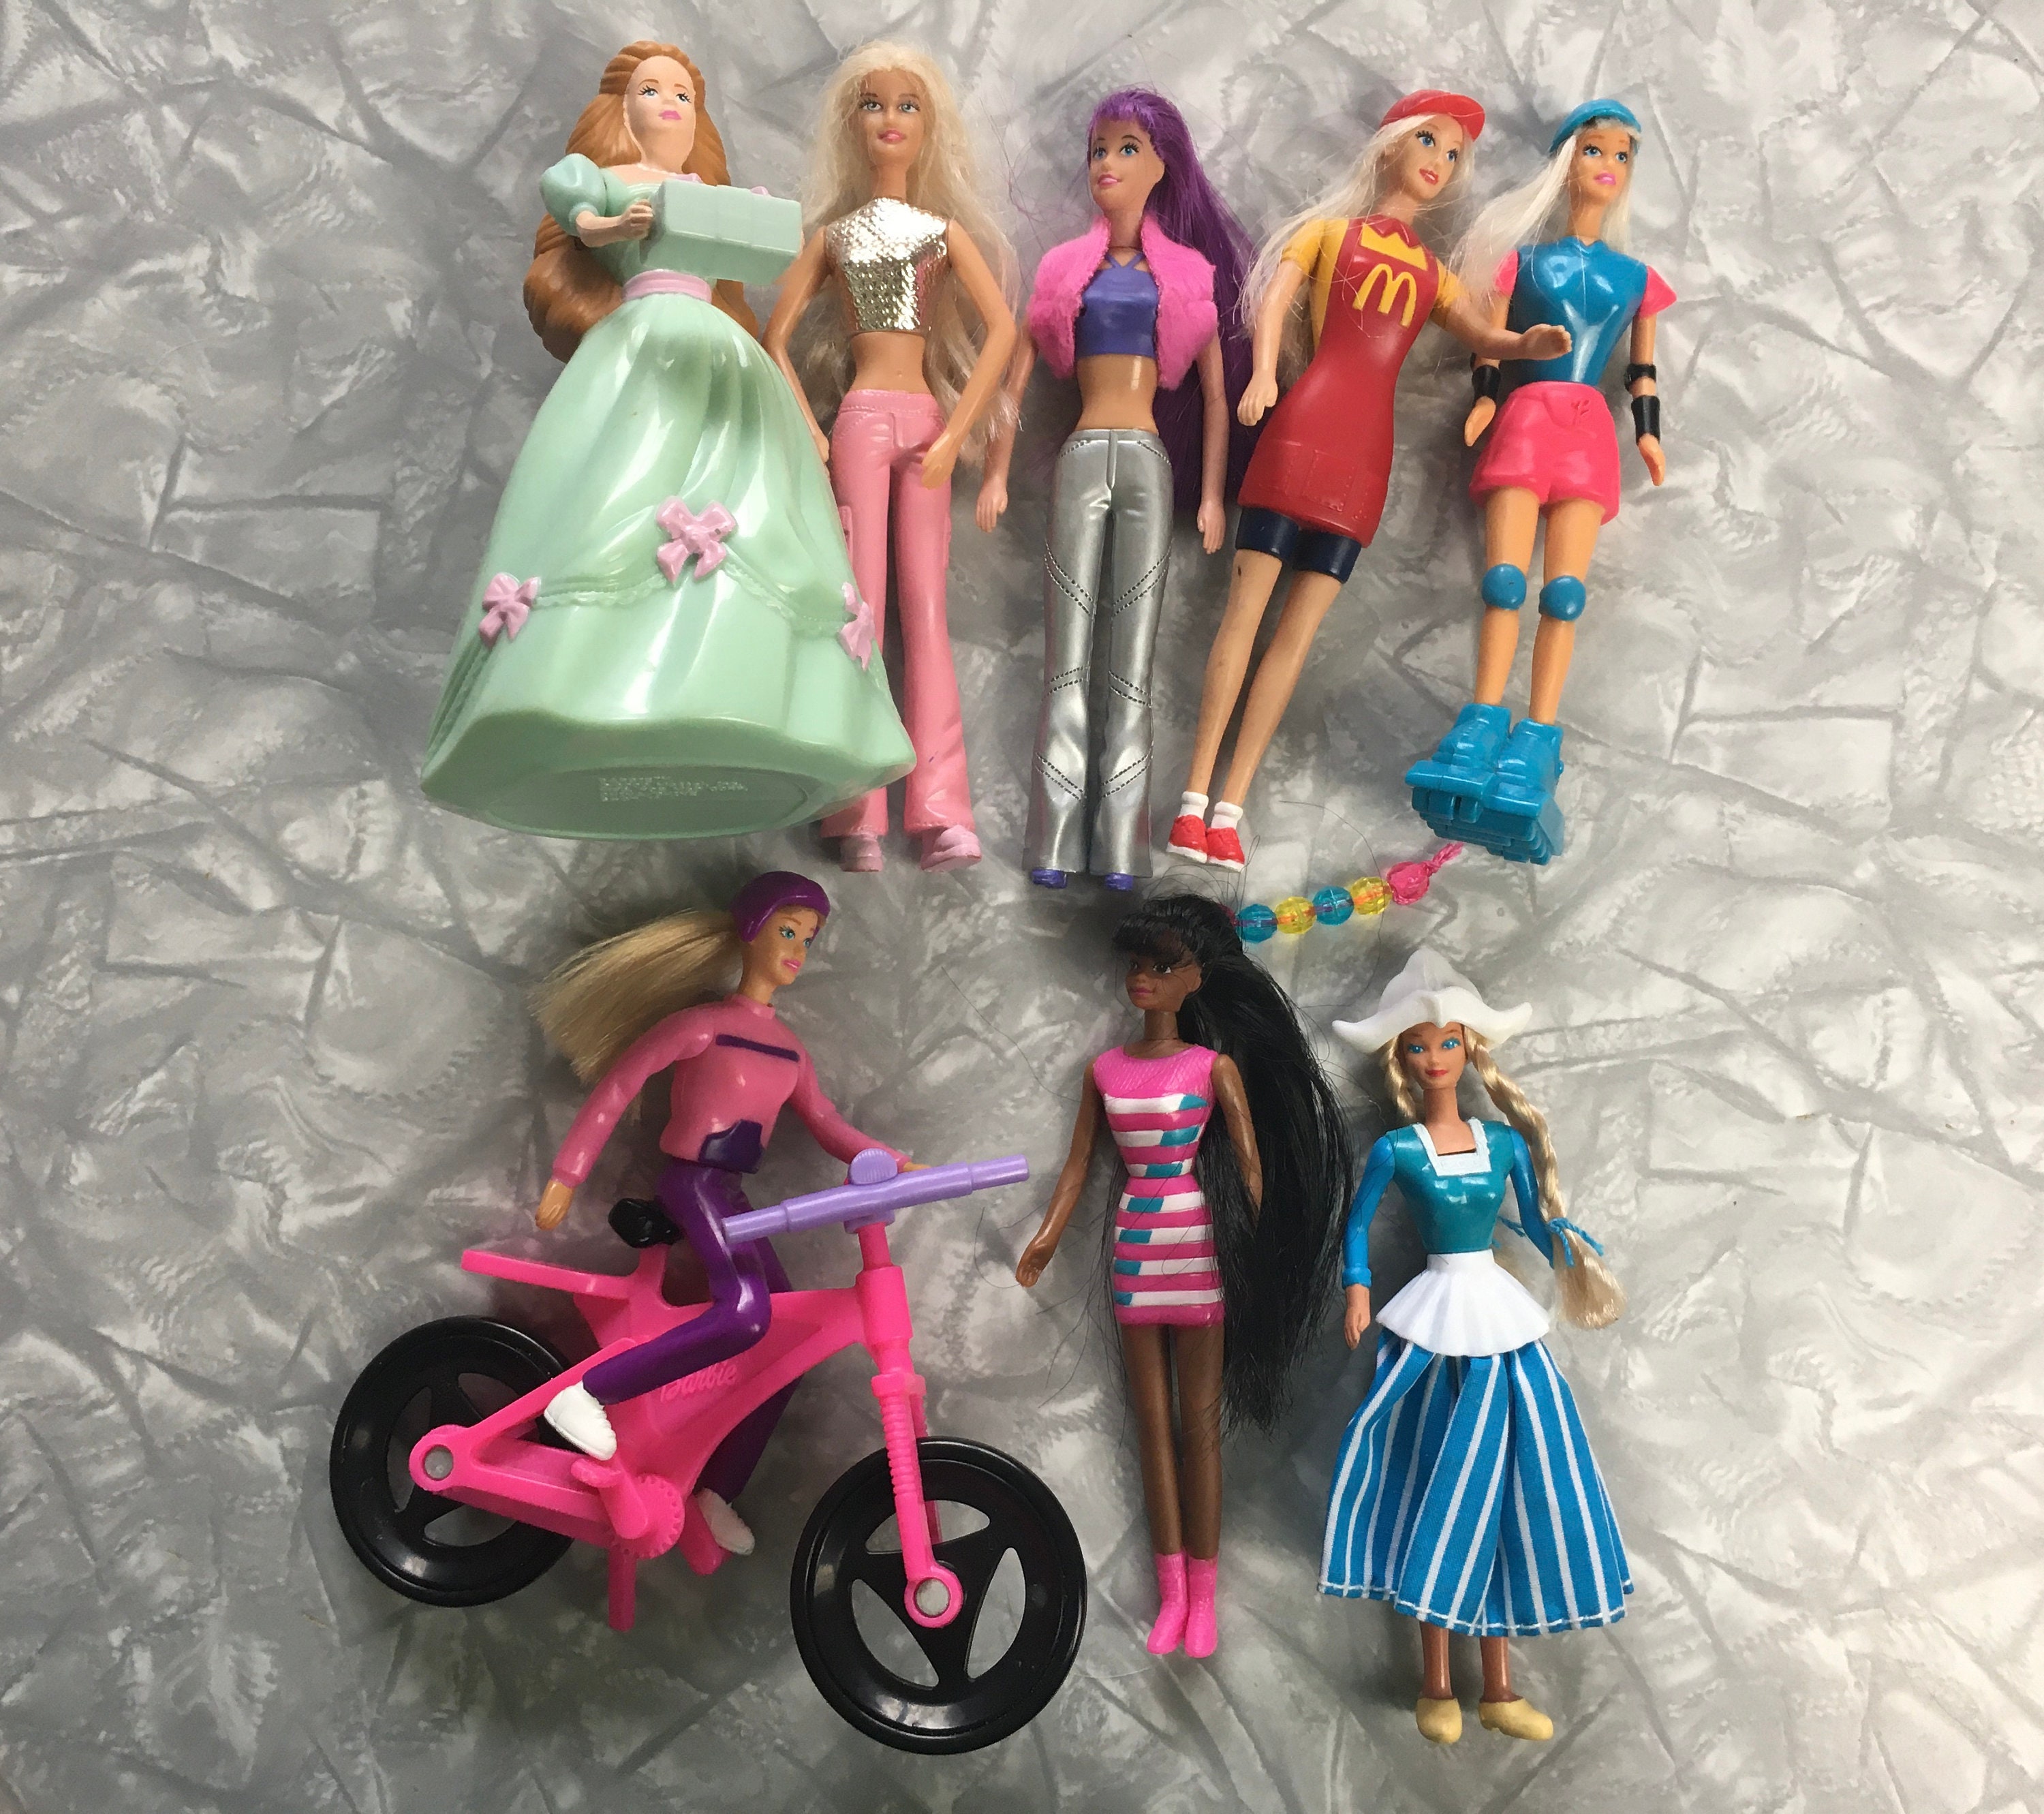 NEW FACTORY SEALED 2002 McDonald's HAPPY MEAL TOYS BARBIE COMPLETE SET OF 6 